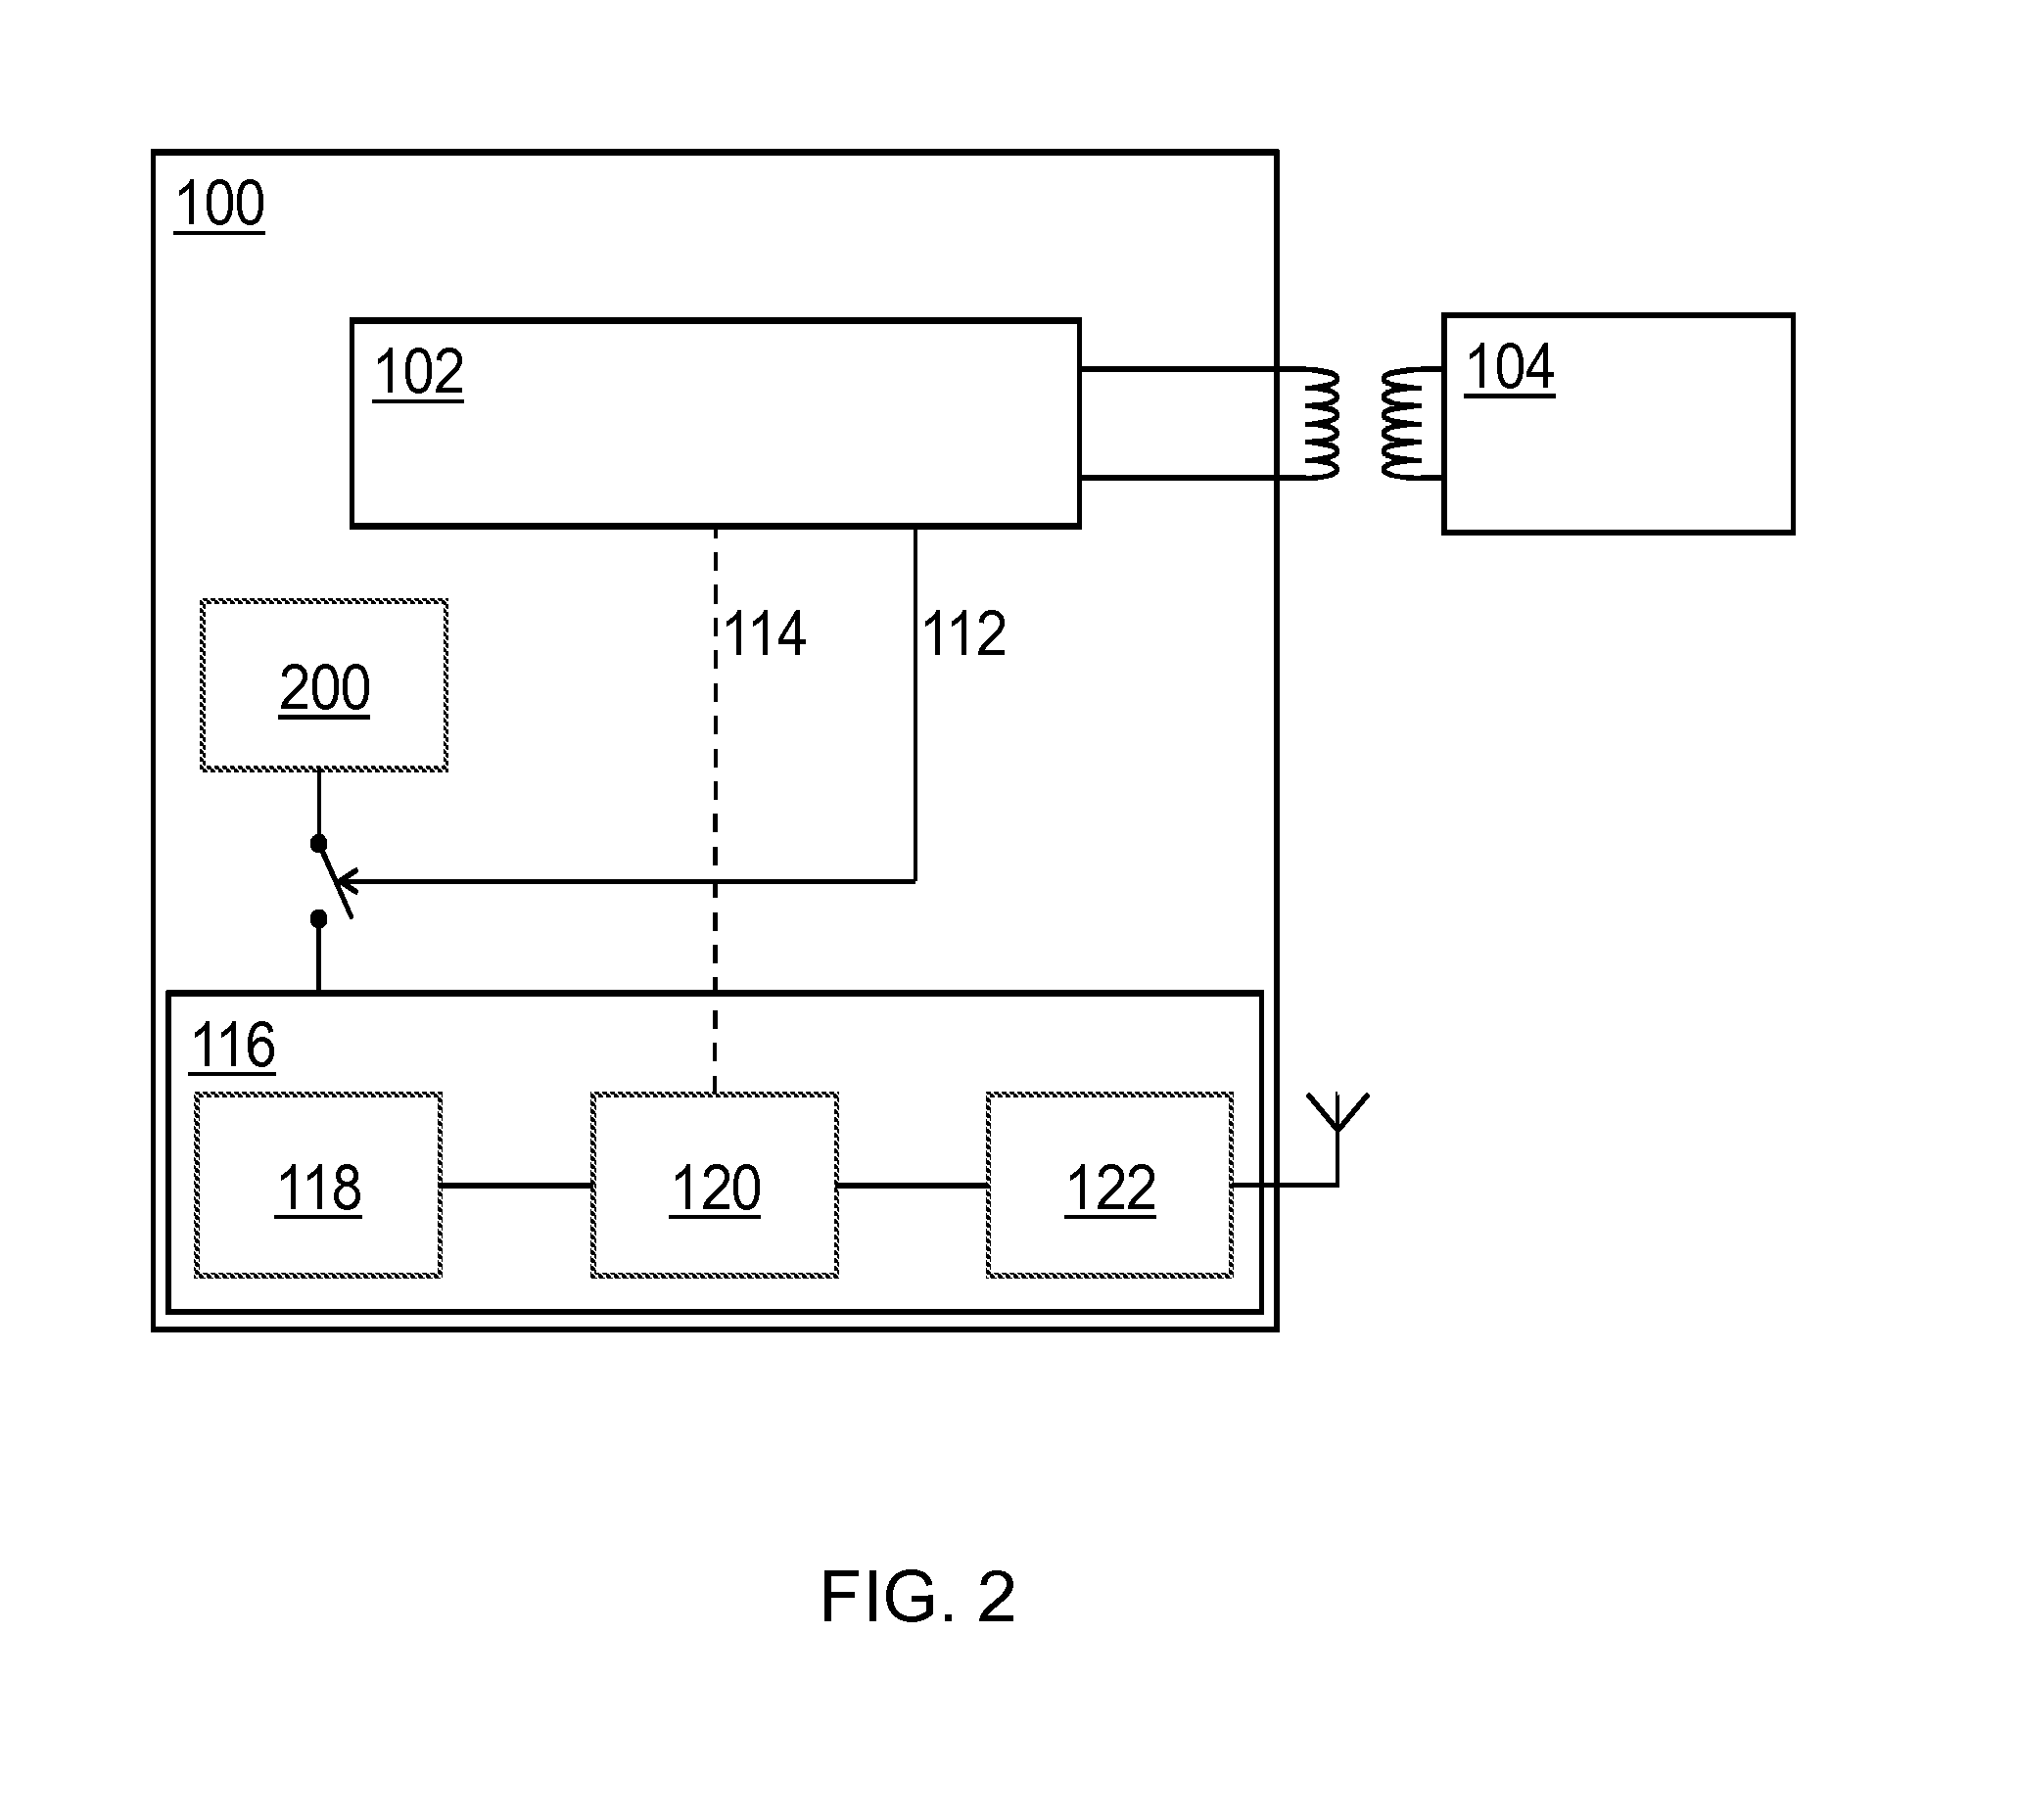 System and method for commissioning devices